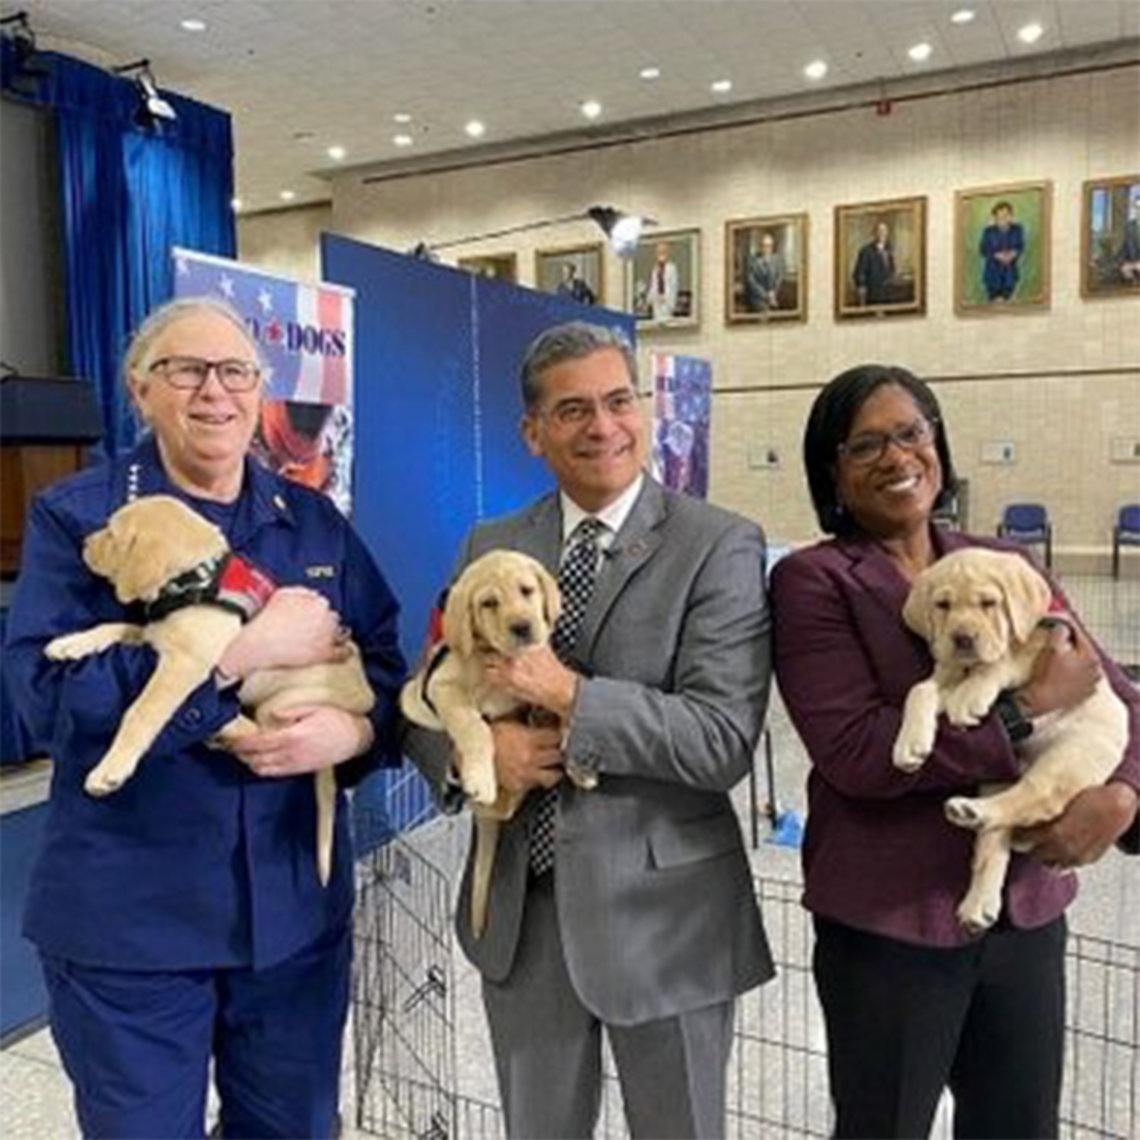 Levine, Becerra and Delphin-Rittmon stand smiling, each holding a puppy.